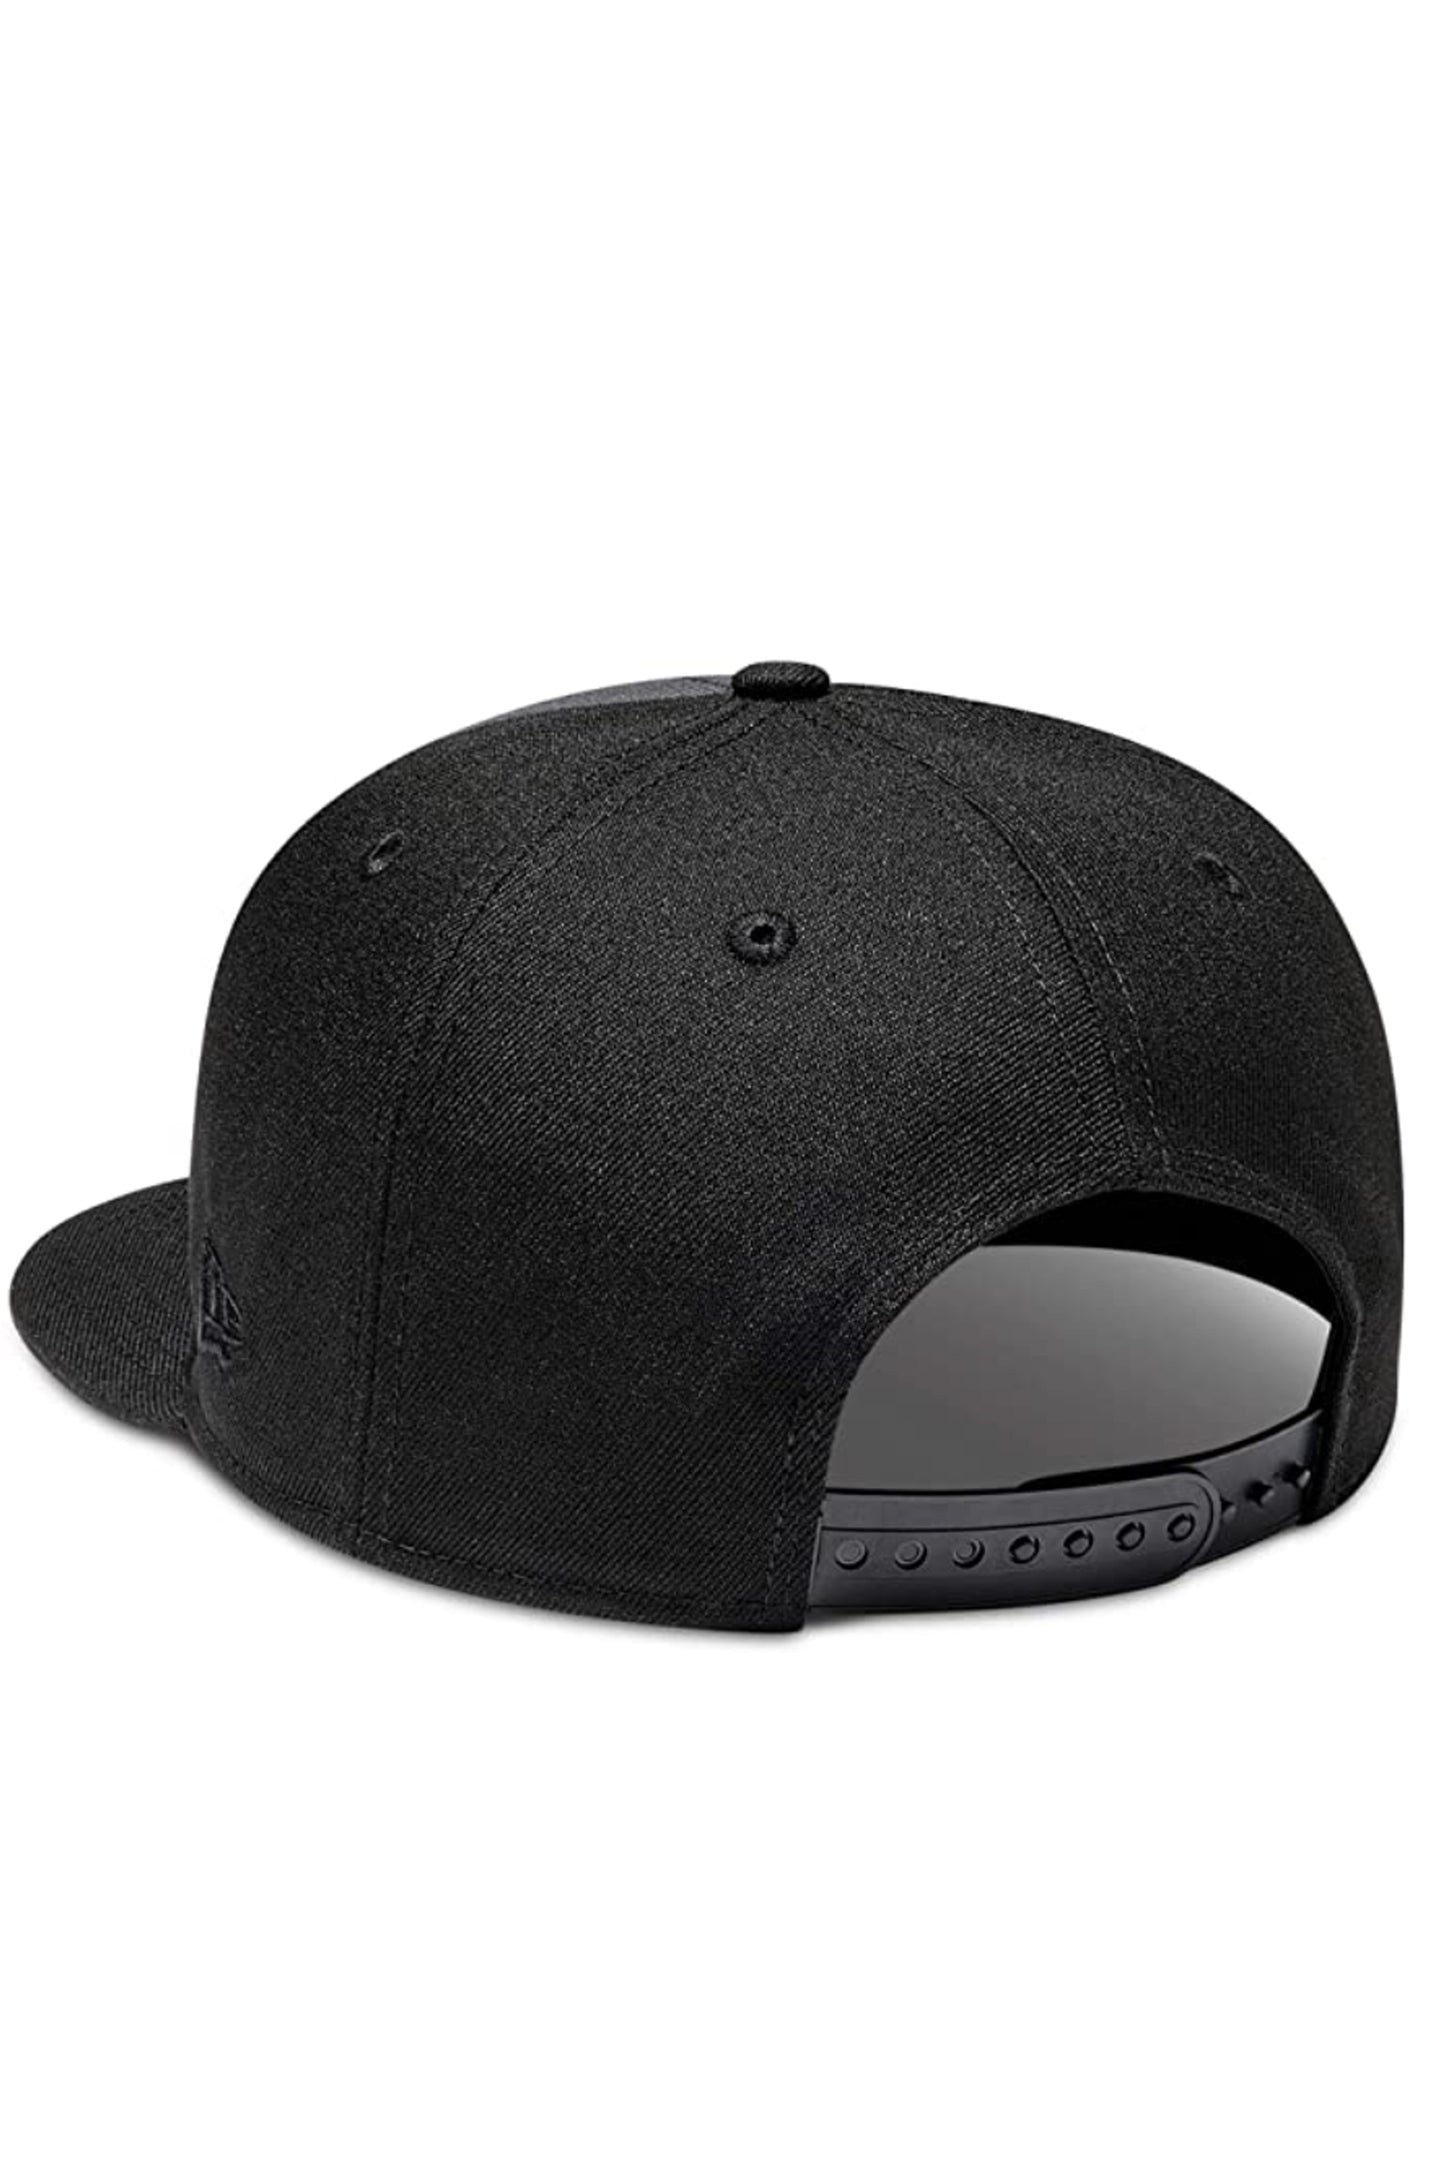 ImportWorx Black Checkered 9FIFTY Embroidered Snapback Hat